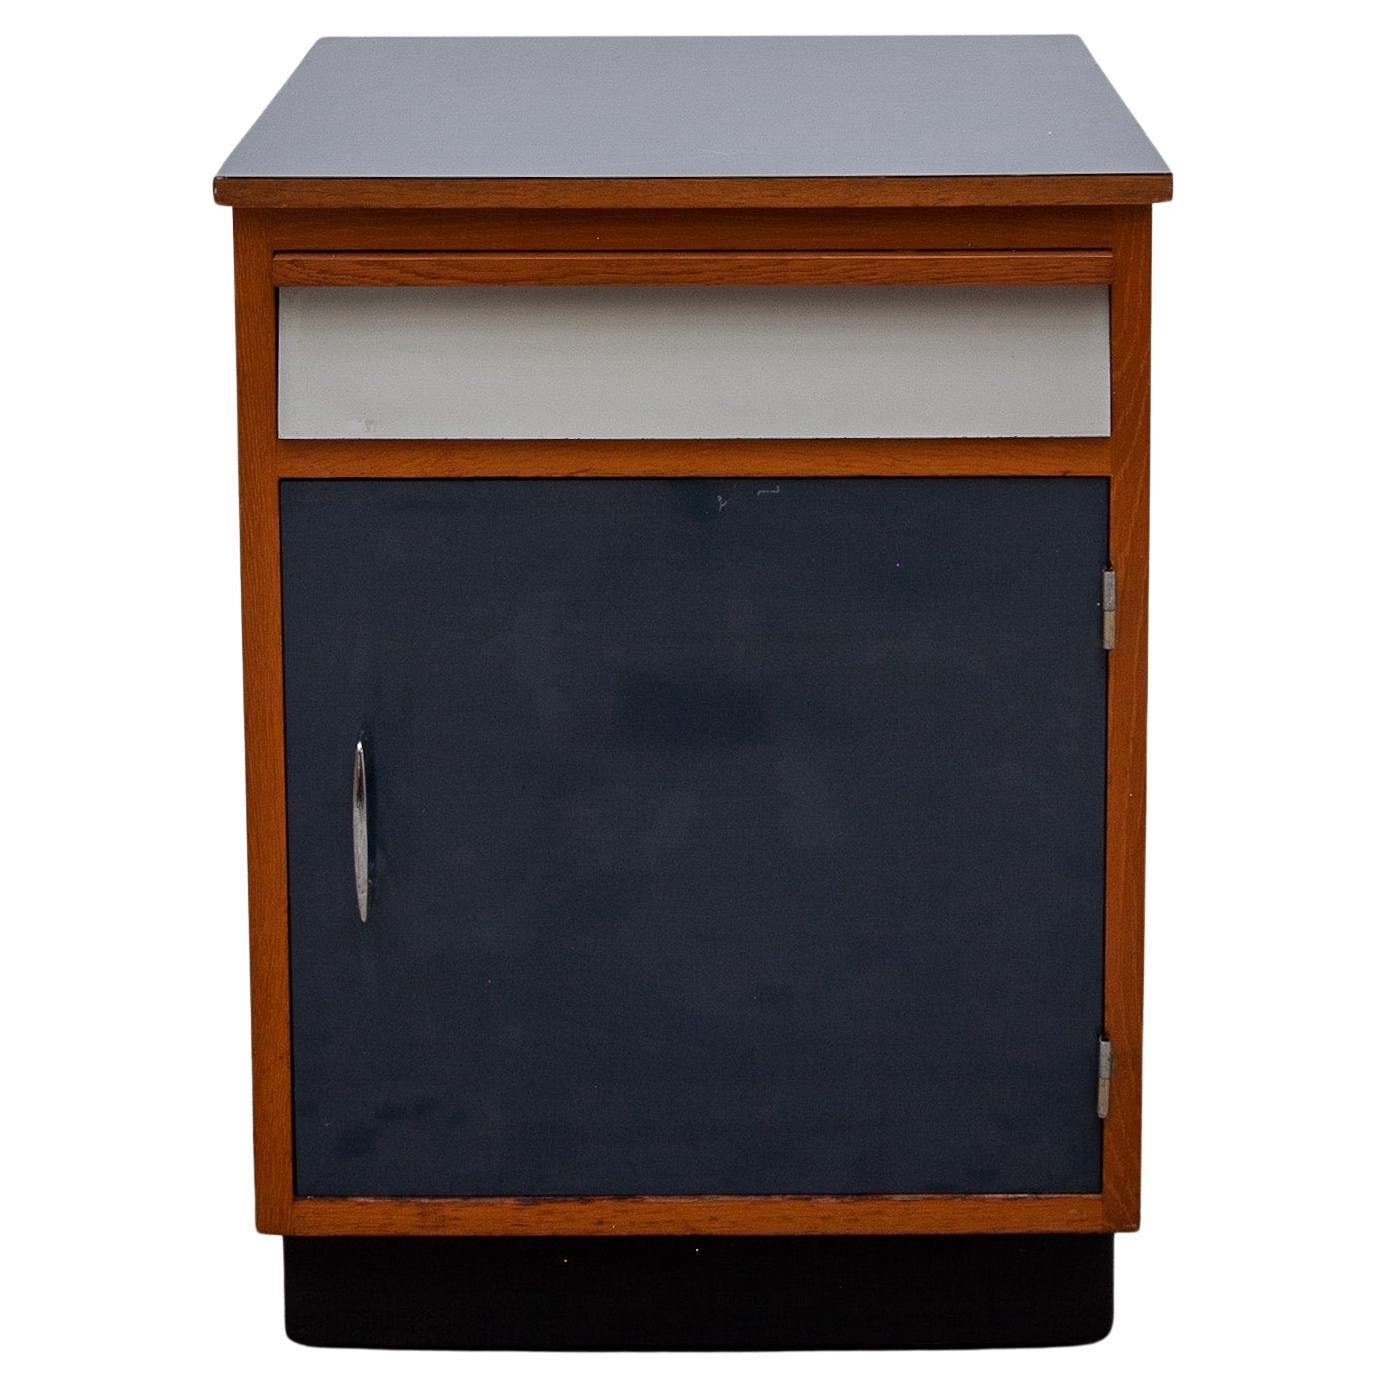 Modernist Blue and White Laminate Fifties Small Sideboard Tubax 1958, Belgium